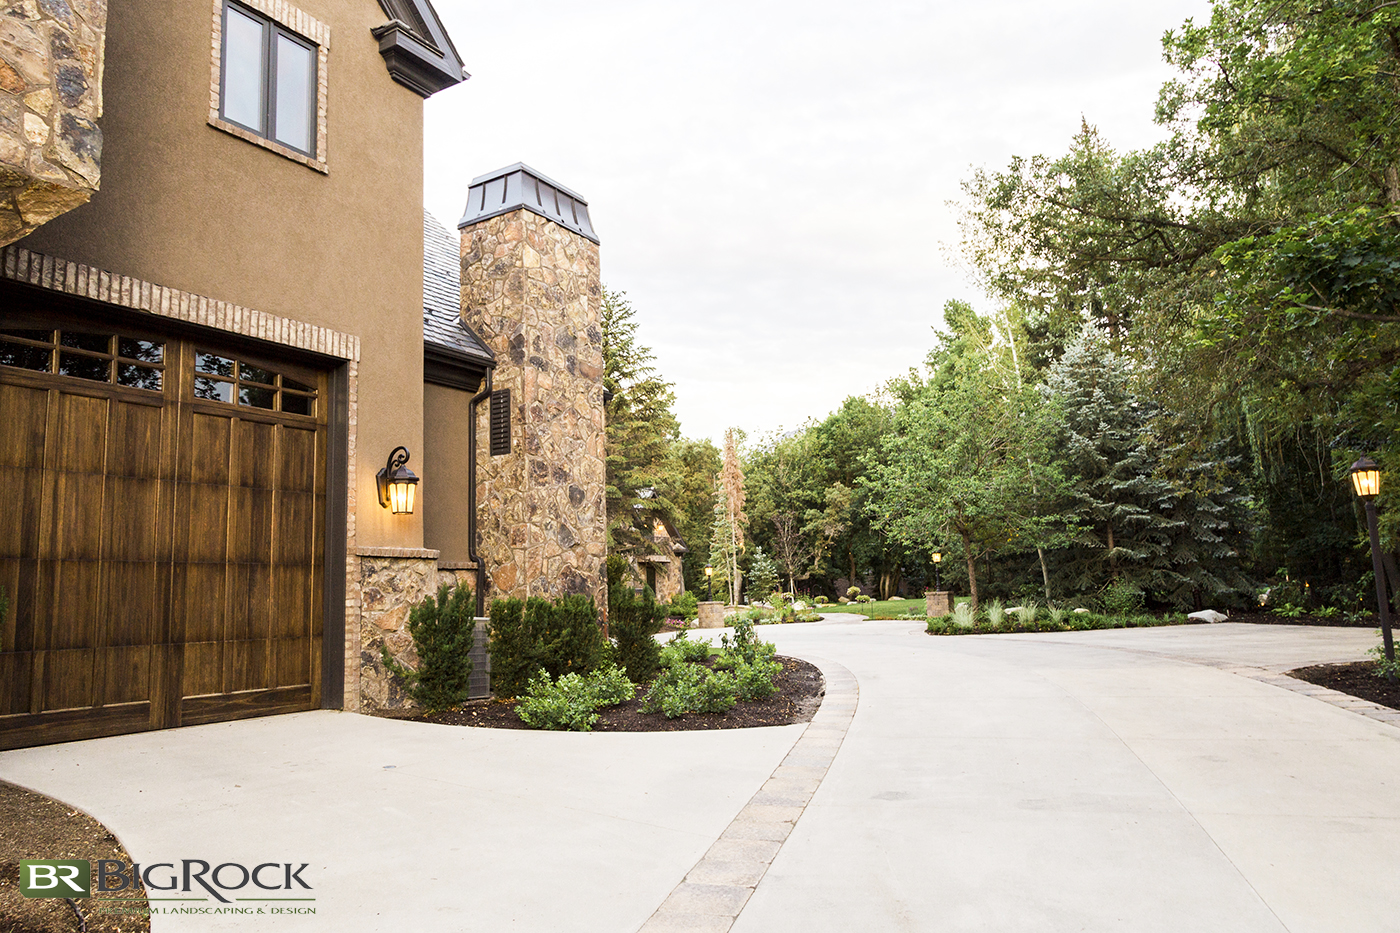 Big Rock Landscaping design will ensure to accentuate your home's architecture and make use of corners, edges and pockets for a full landscaping design.